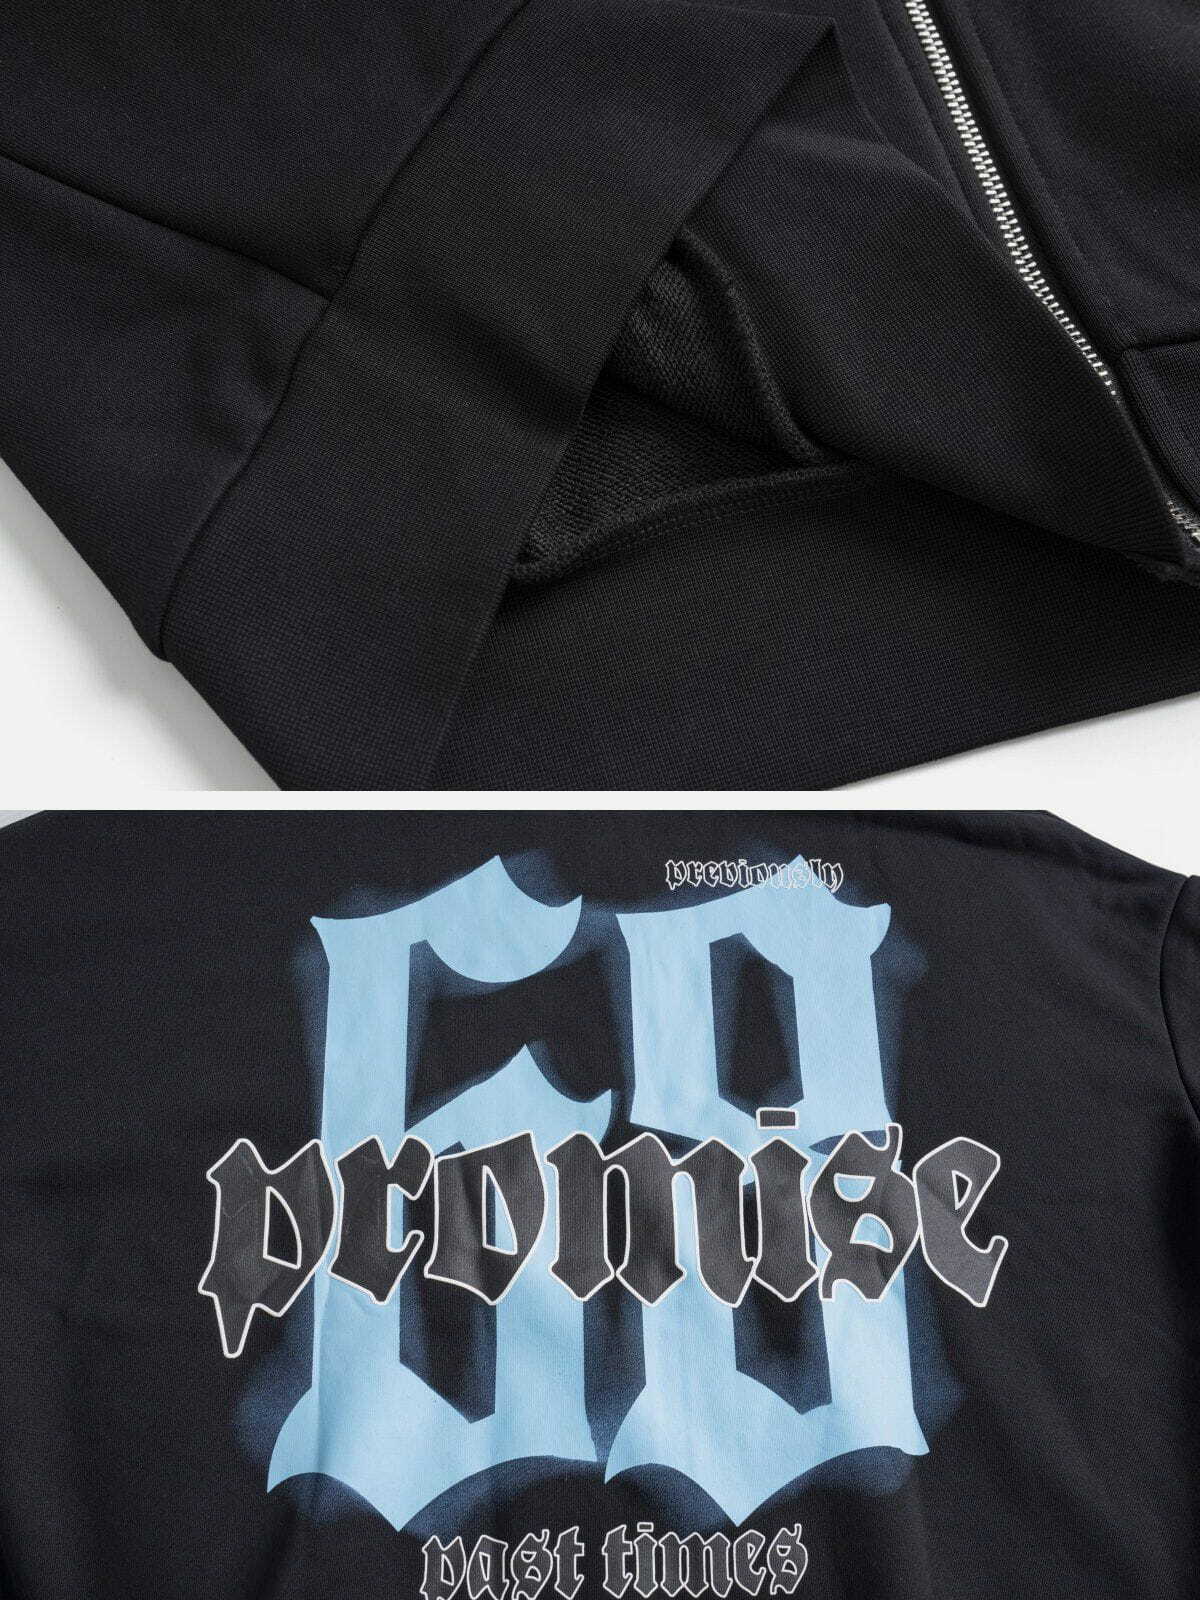 gothic letter number hoodie edgy & youthful streetwear 3685